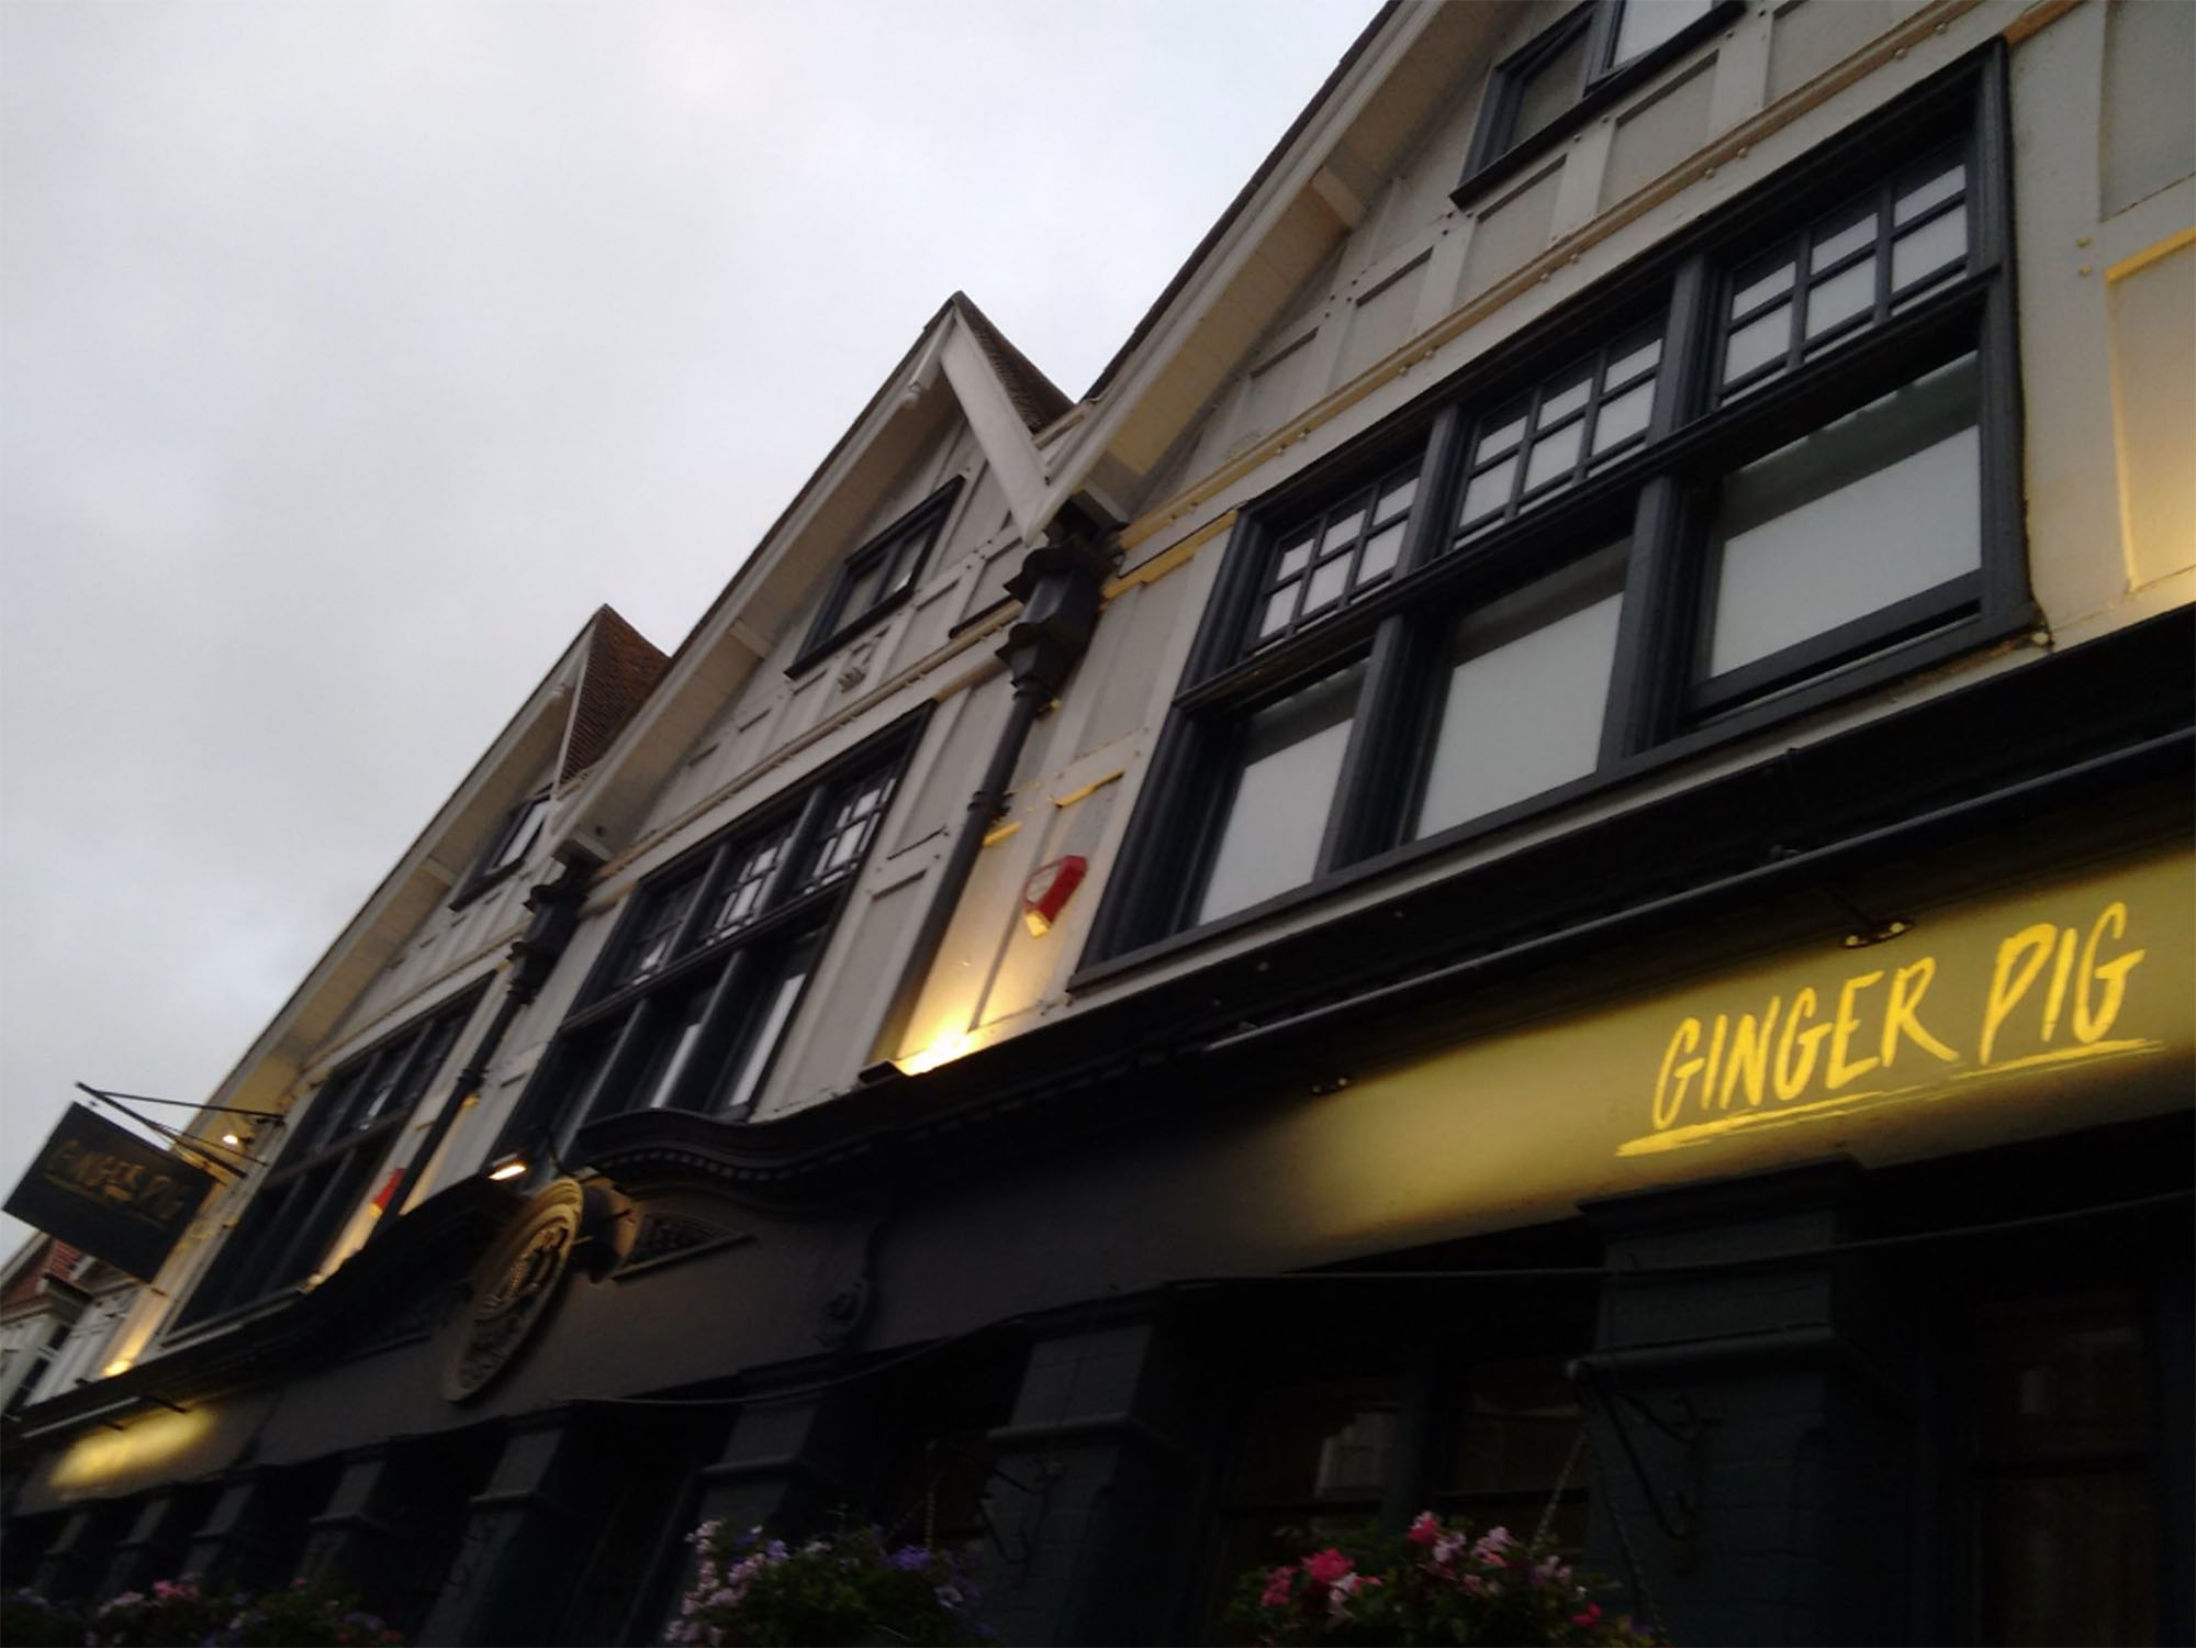 Best Hotels in Brighton The Ginger Pig